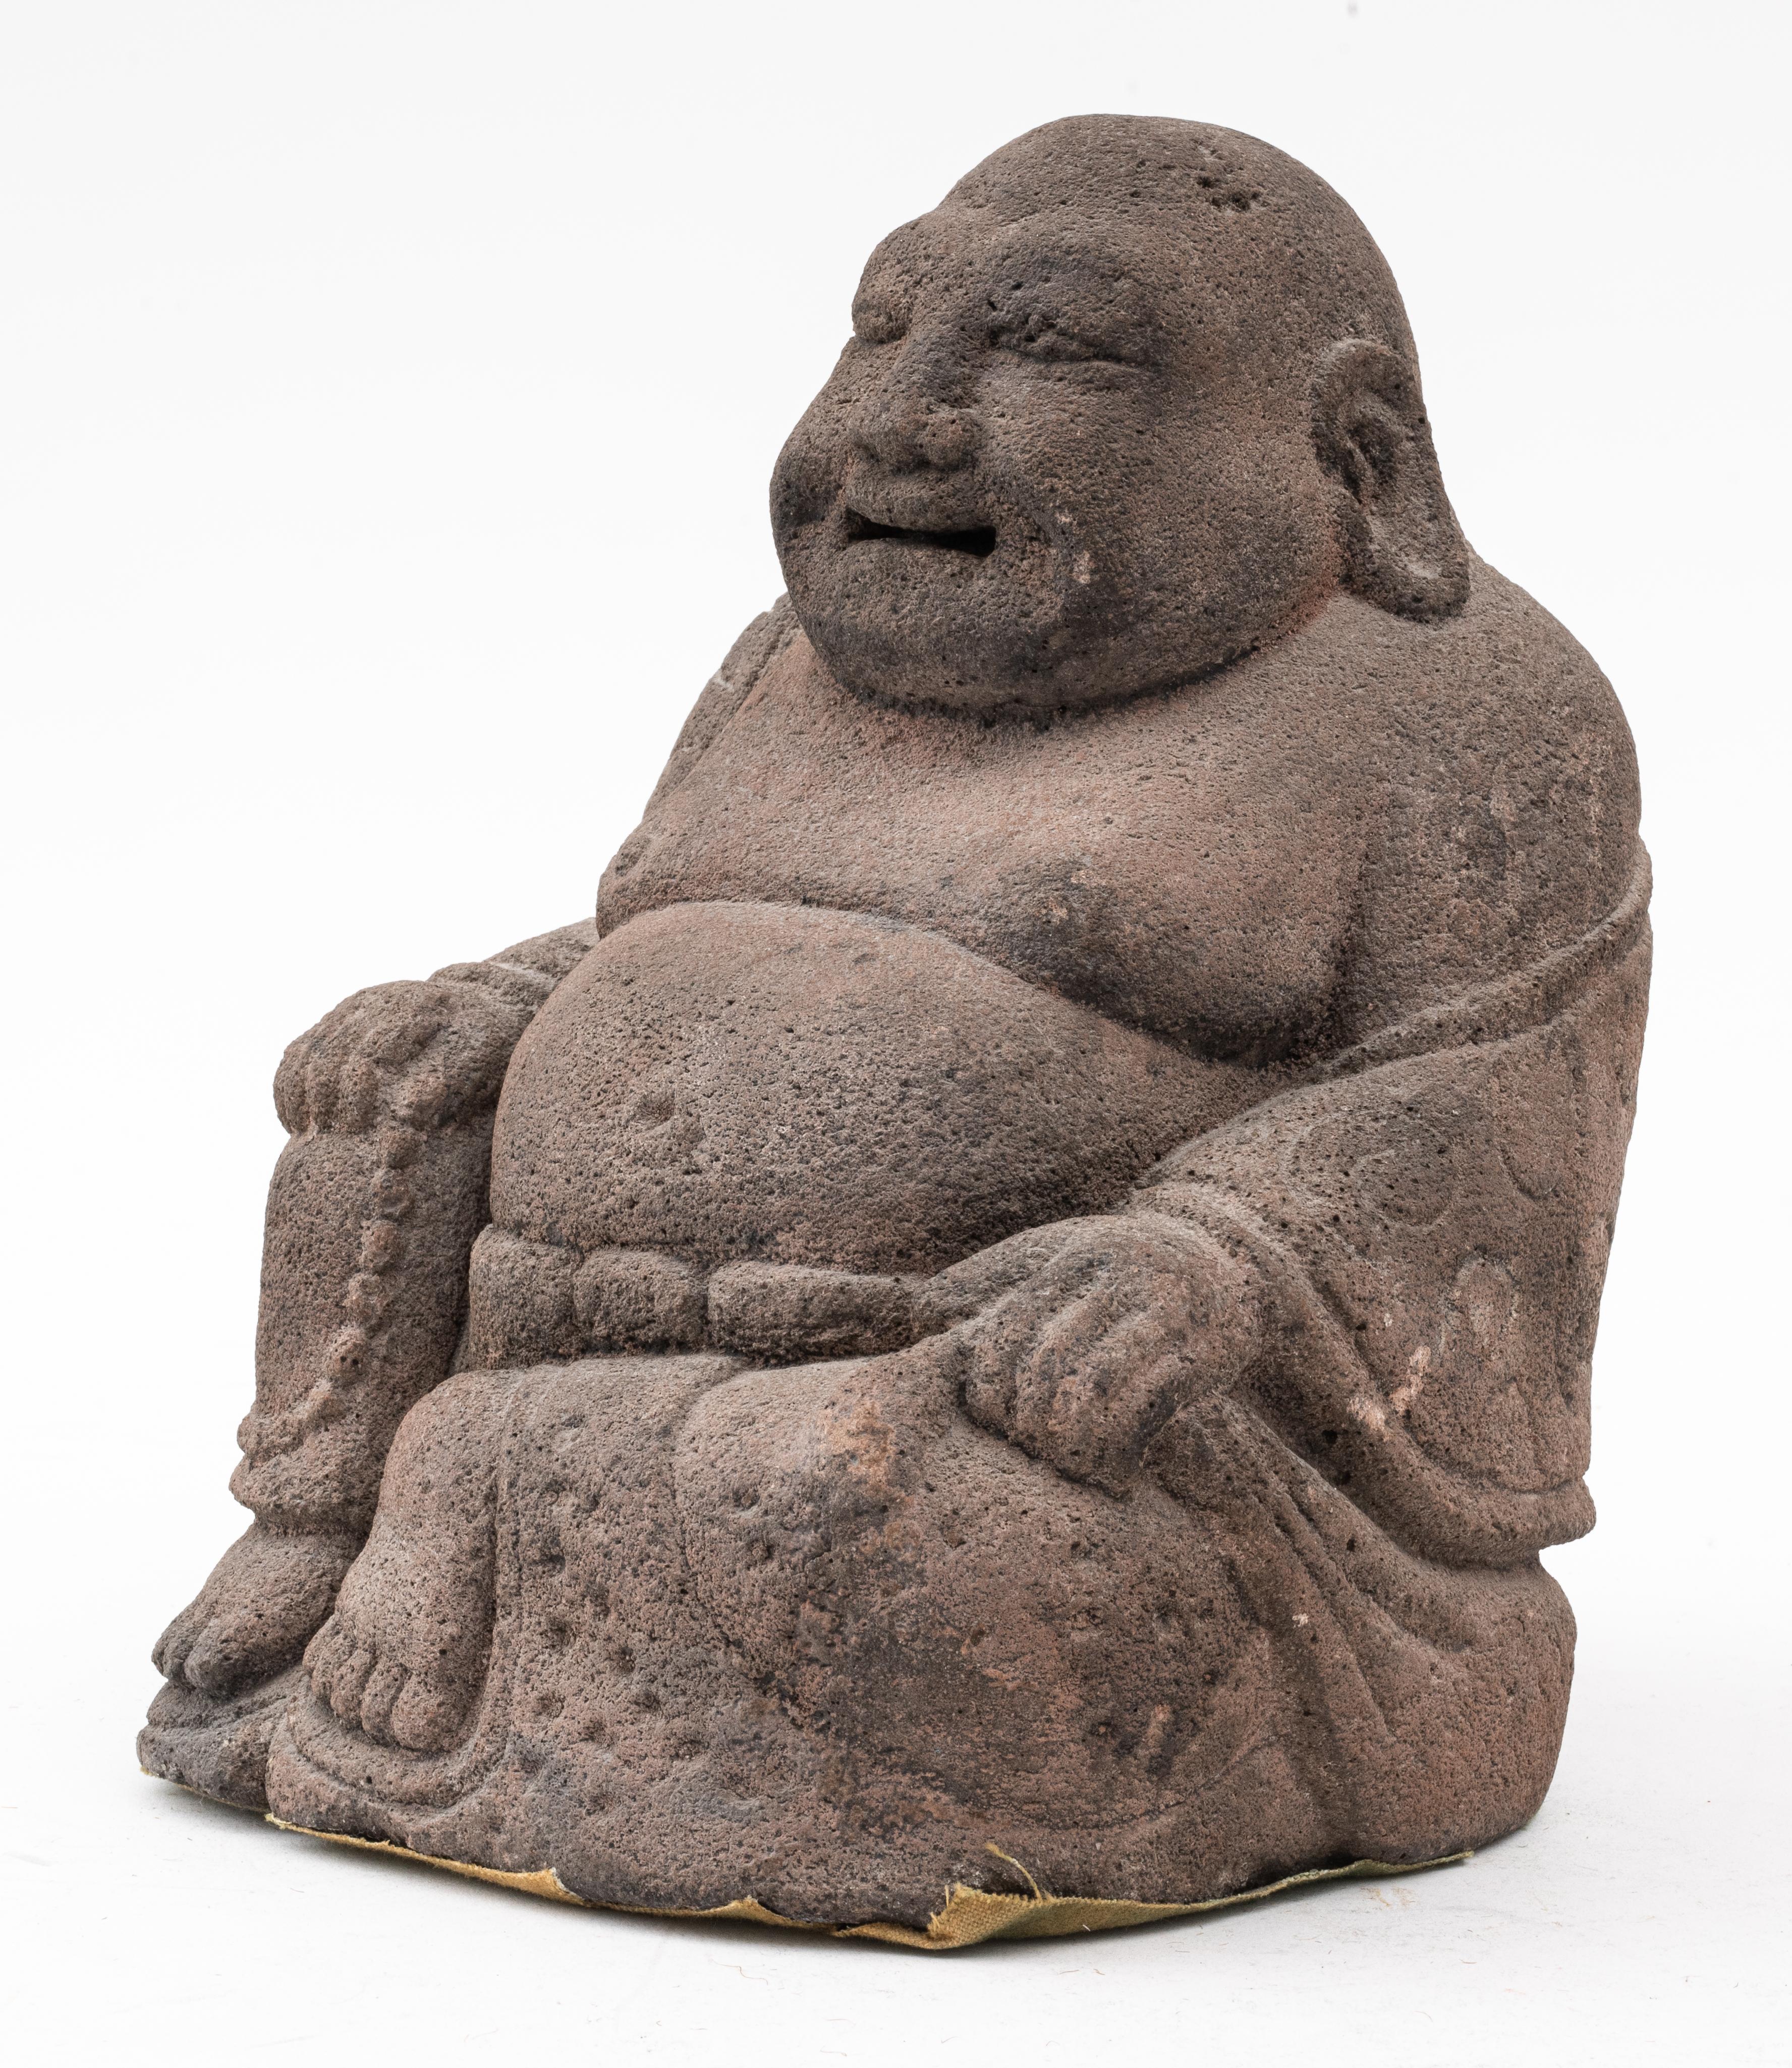 Javanese andesite carved sculpture of the happy Buddha / Kubera / Kuvera / Kuber seated, 16th century or later. 
Measures: 9.2